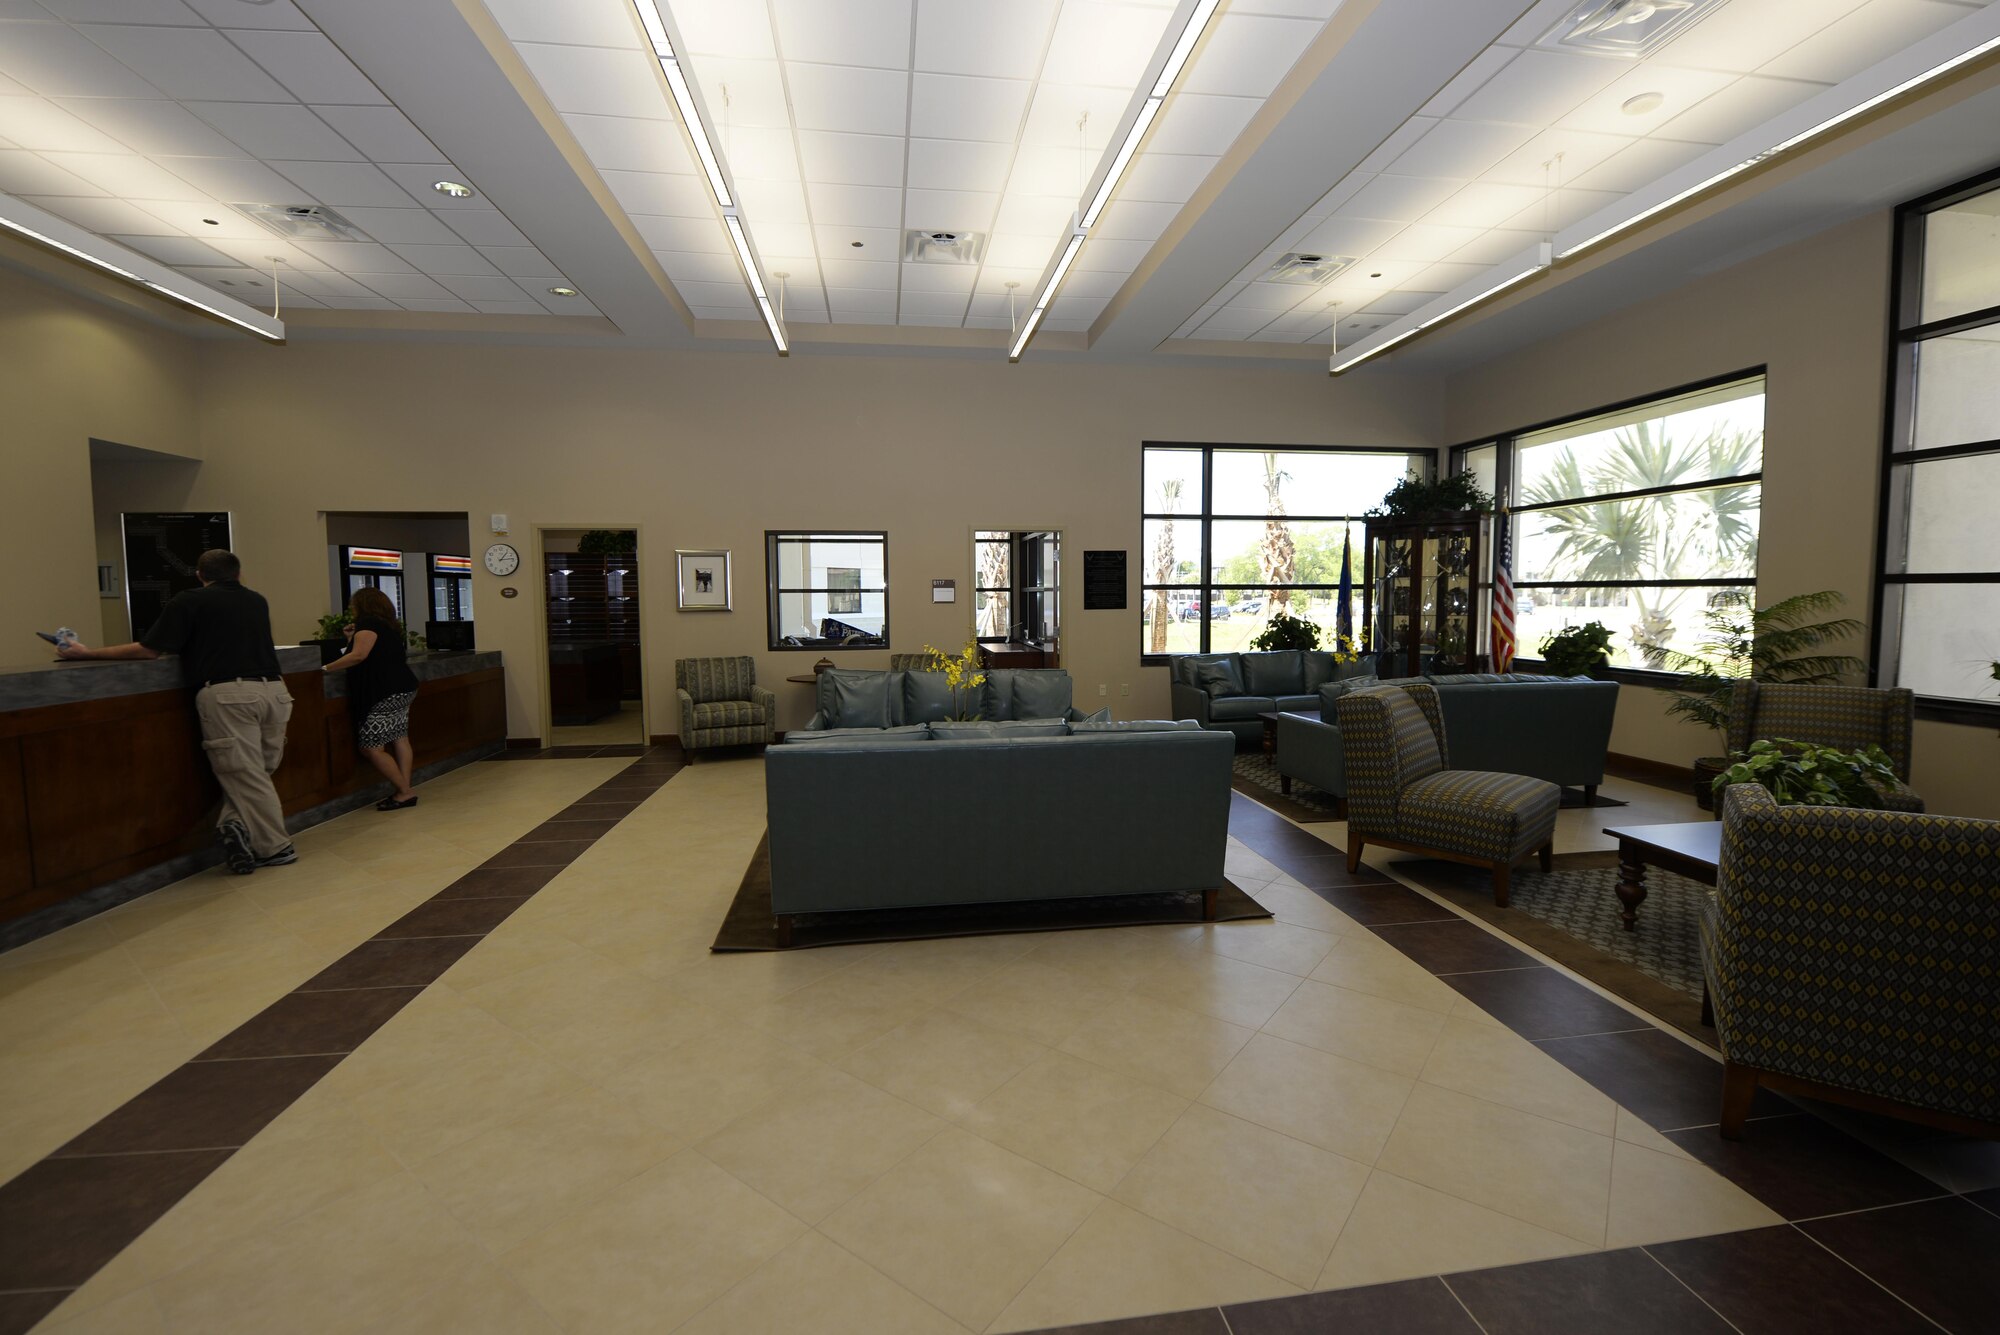 The lobby of the newly built visiting quarters on MacDill Air Force Base, Florida, features a coffee shop in the lobby. (U.S. Air Force photo/Tech. Sgt. Krystie Martinez/Released)